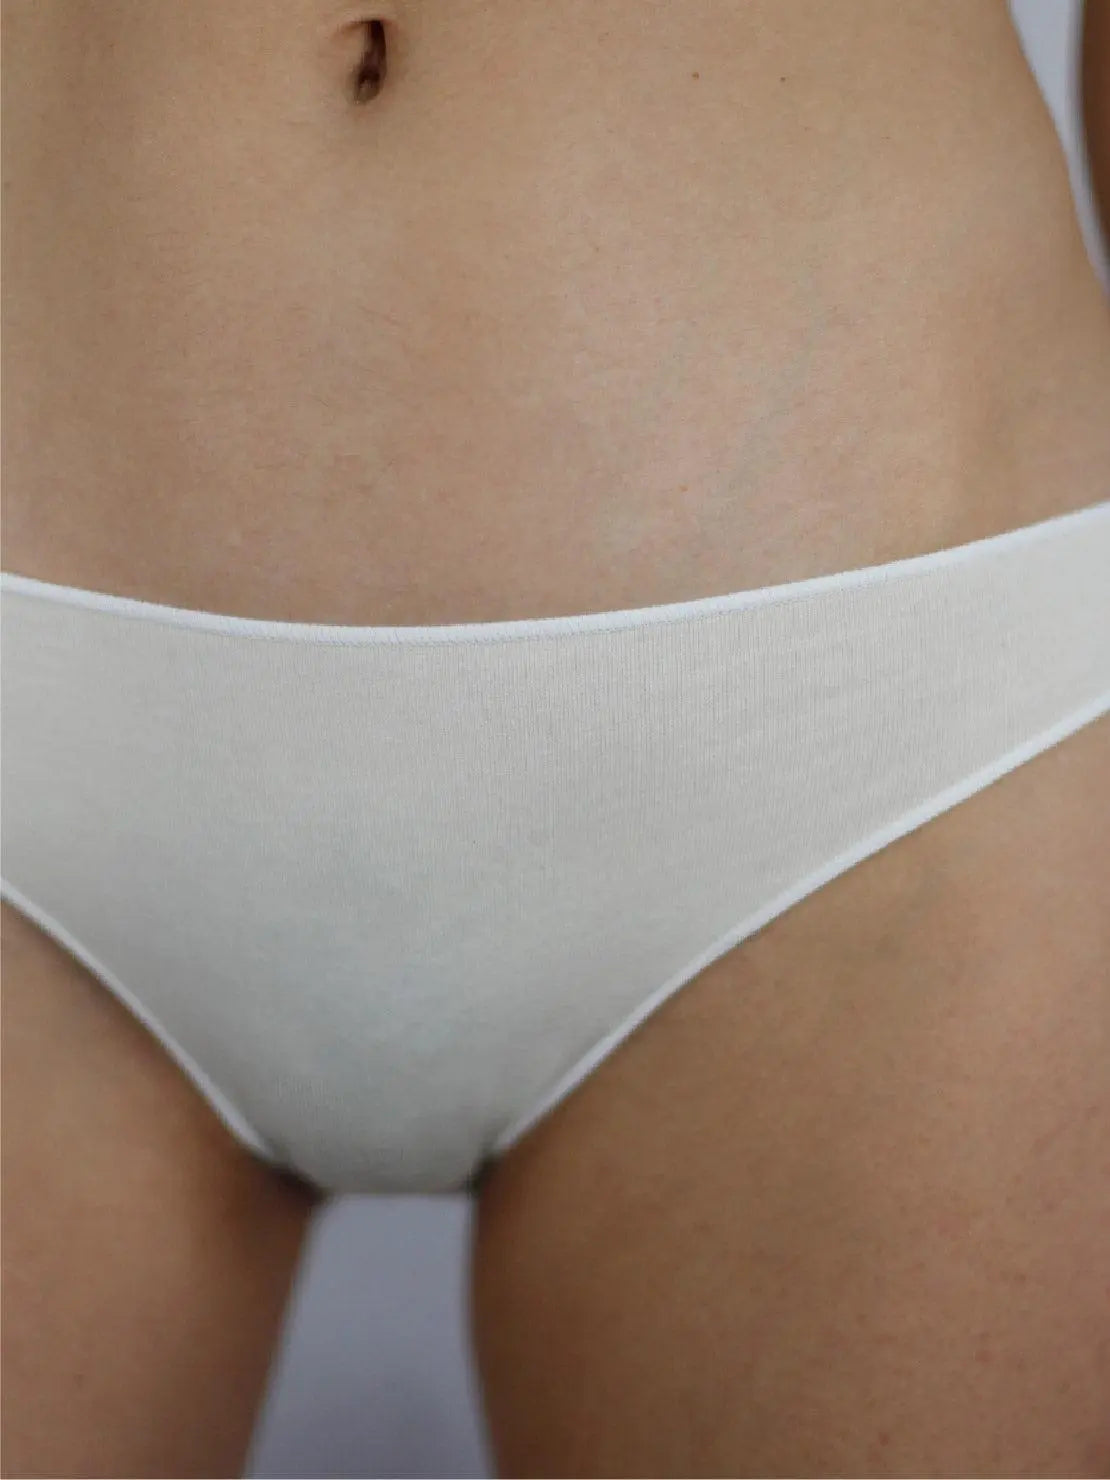 A person wearing white underwear and a white top from Talk Under Light is standing against a plain background. The focus is on the midsection, showcasing the fit and style of the Ecru Classic Organic Cotton Briefs - Talk Under Light available at this Barcelona-based store.